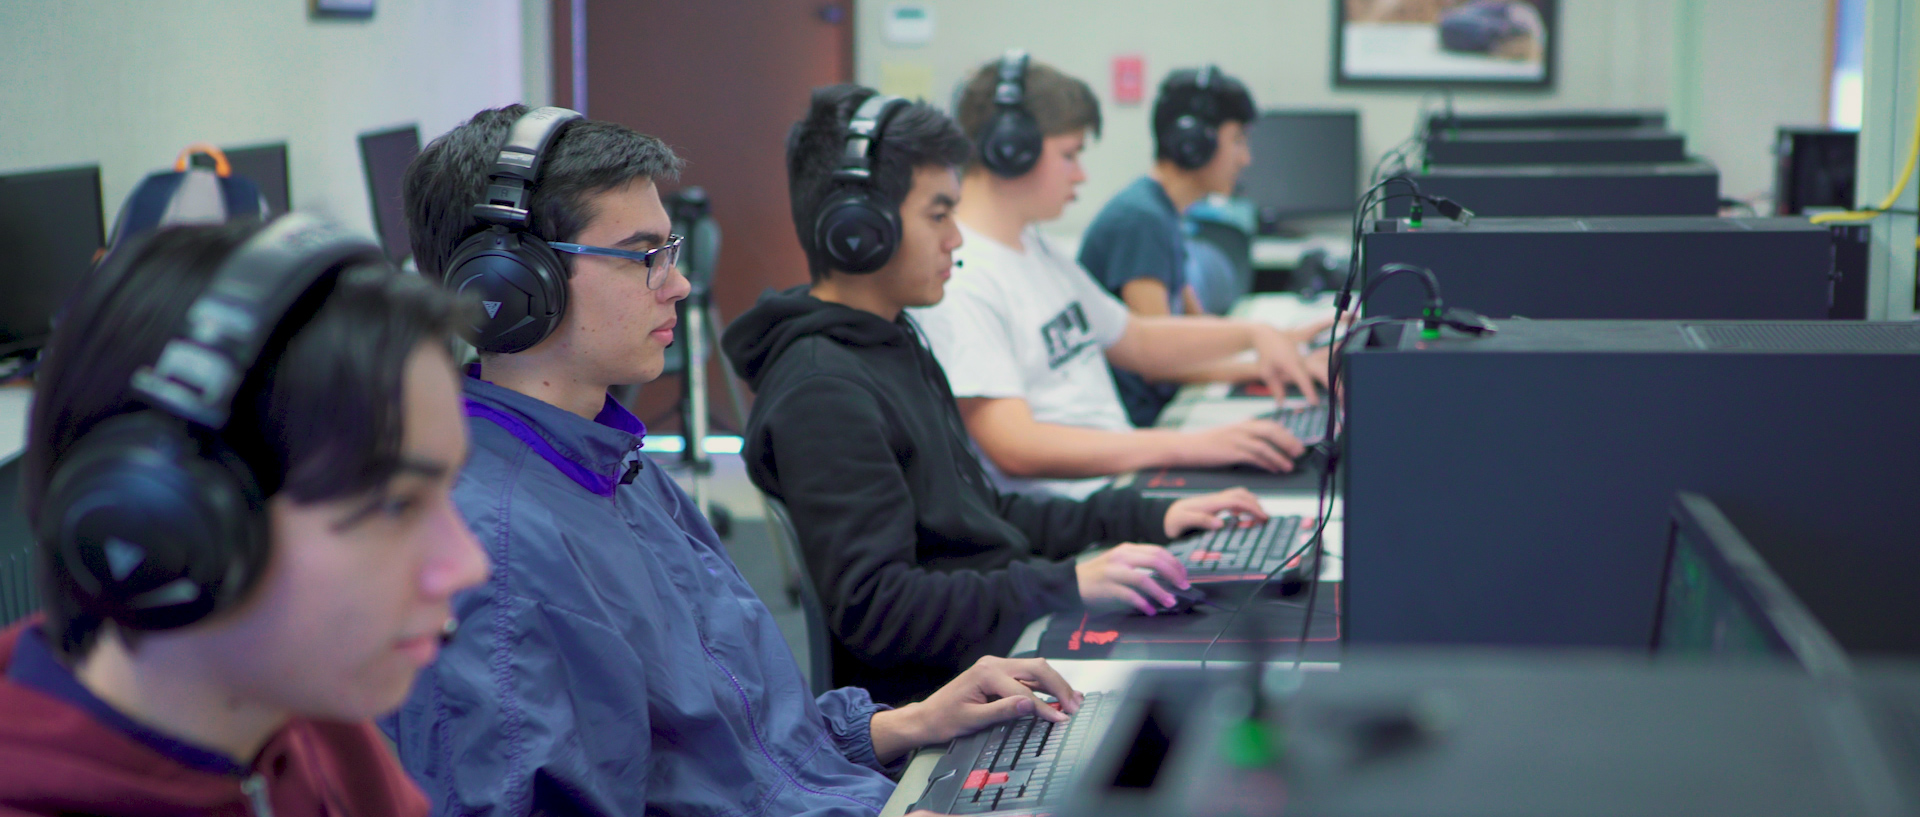 Practice session for a student team in the Orange County High School Esports League